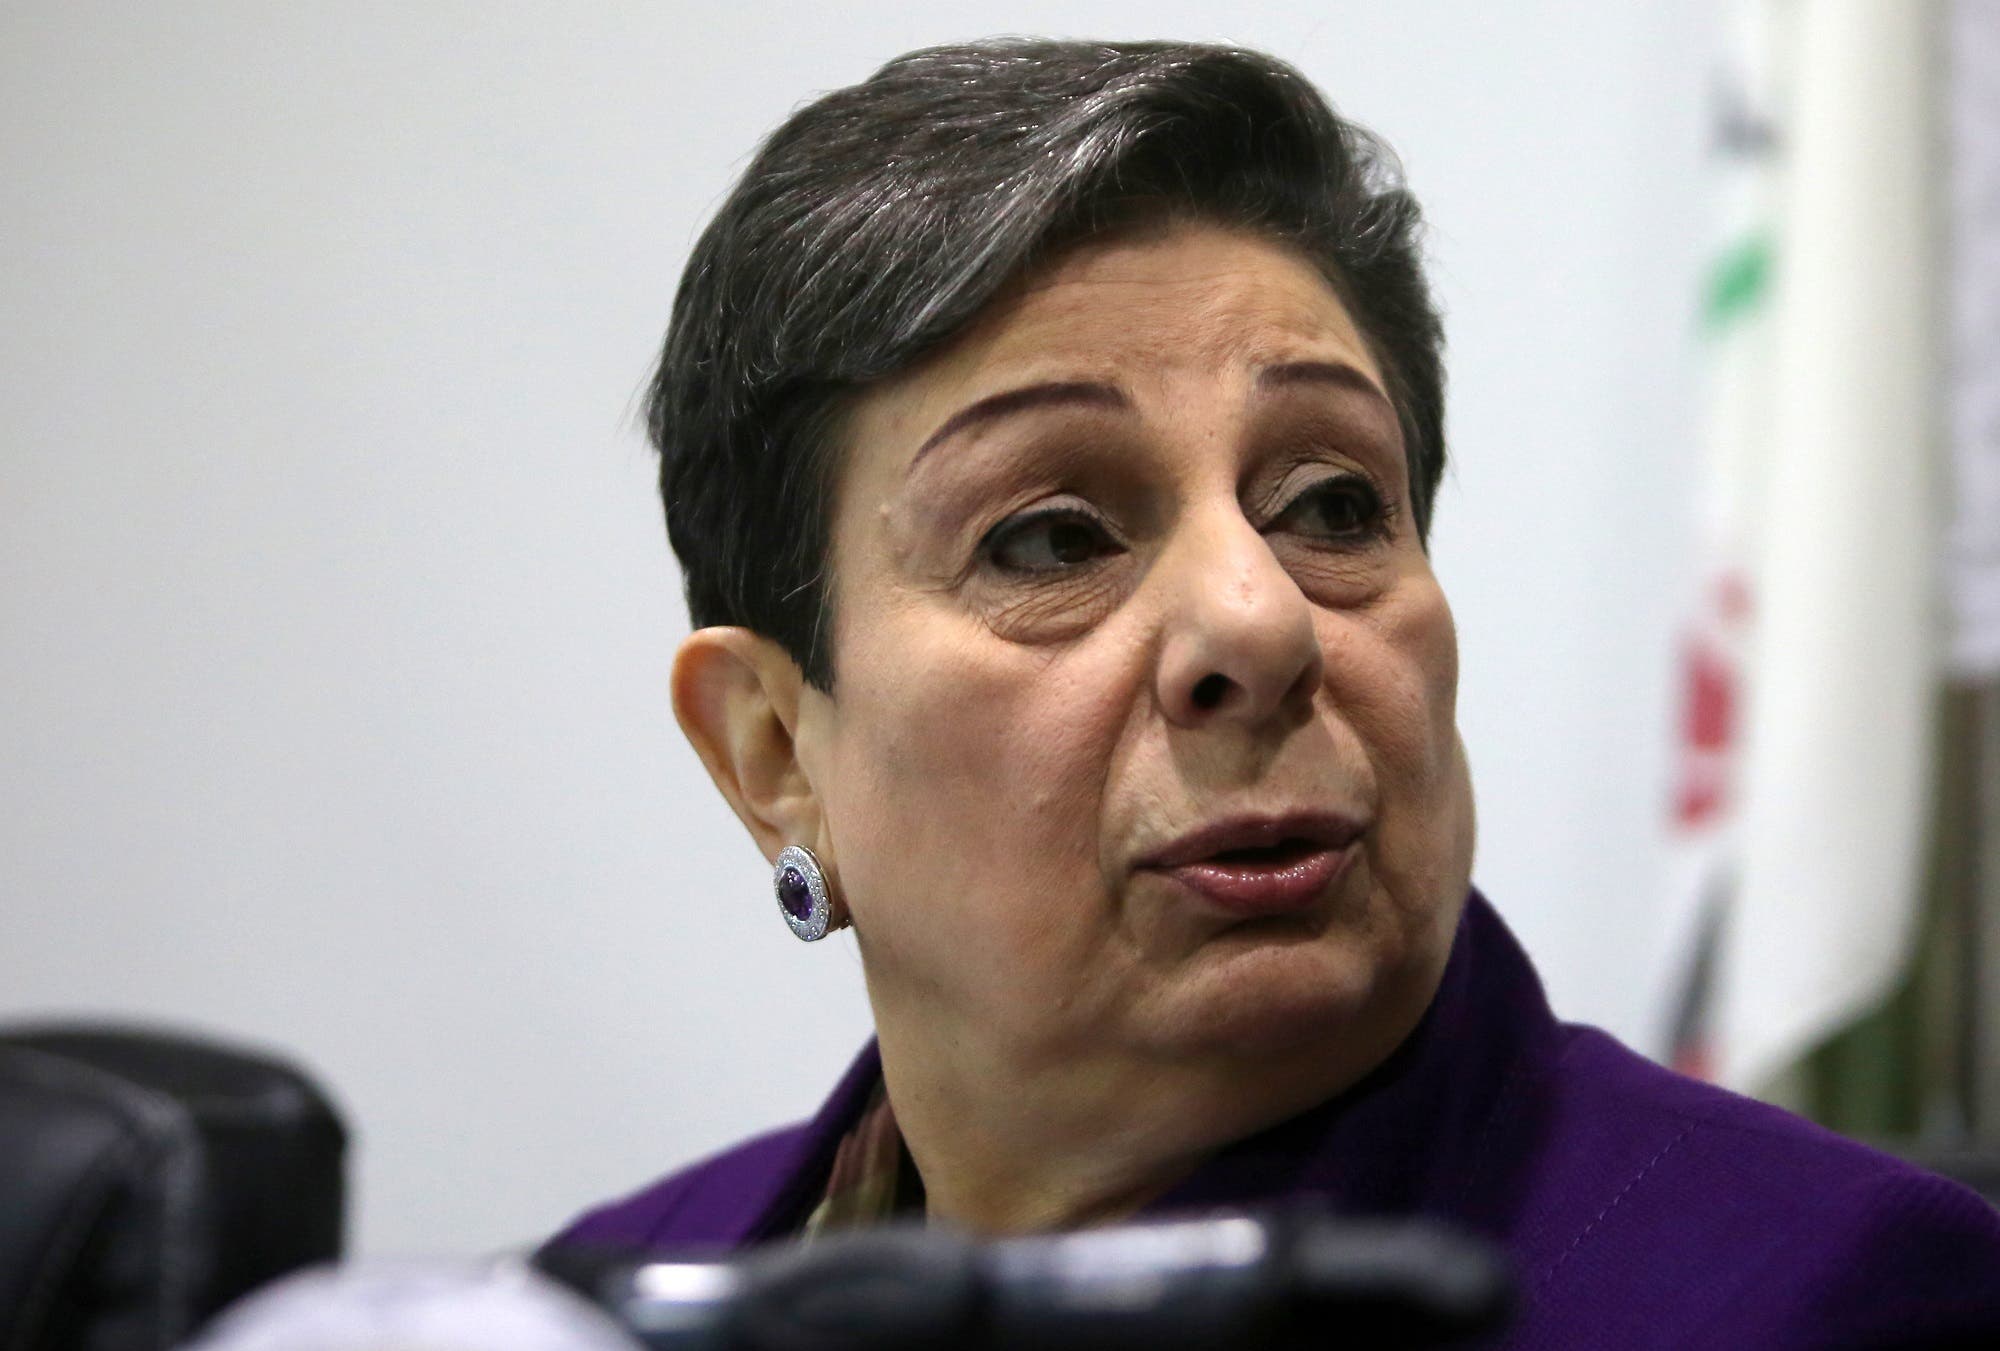 Hanan Ashrawi addresses a press conference in Ramallah on February 24, 2015. (AFP)